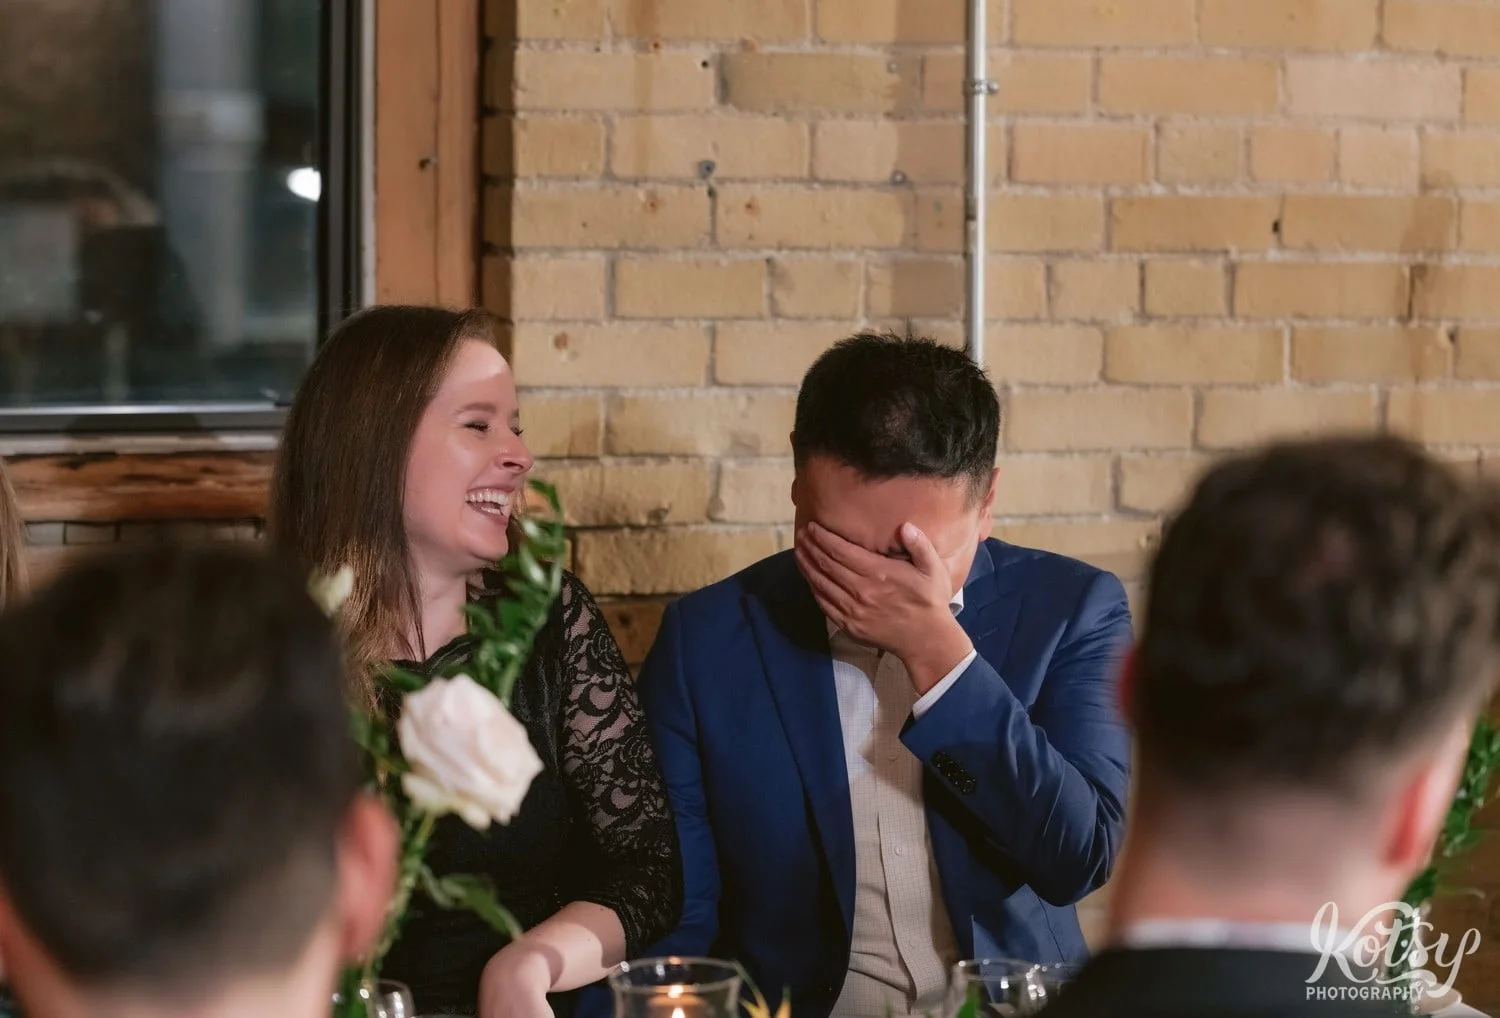 A man in a blue suit and a white dress shirt covers his face while laughing next to another woman laughing during a Second Floor Events wedding reception in Toronto, Canada.